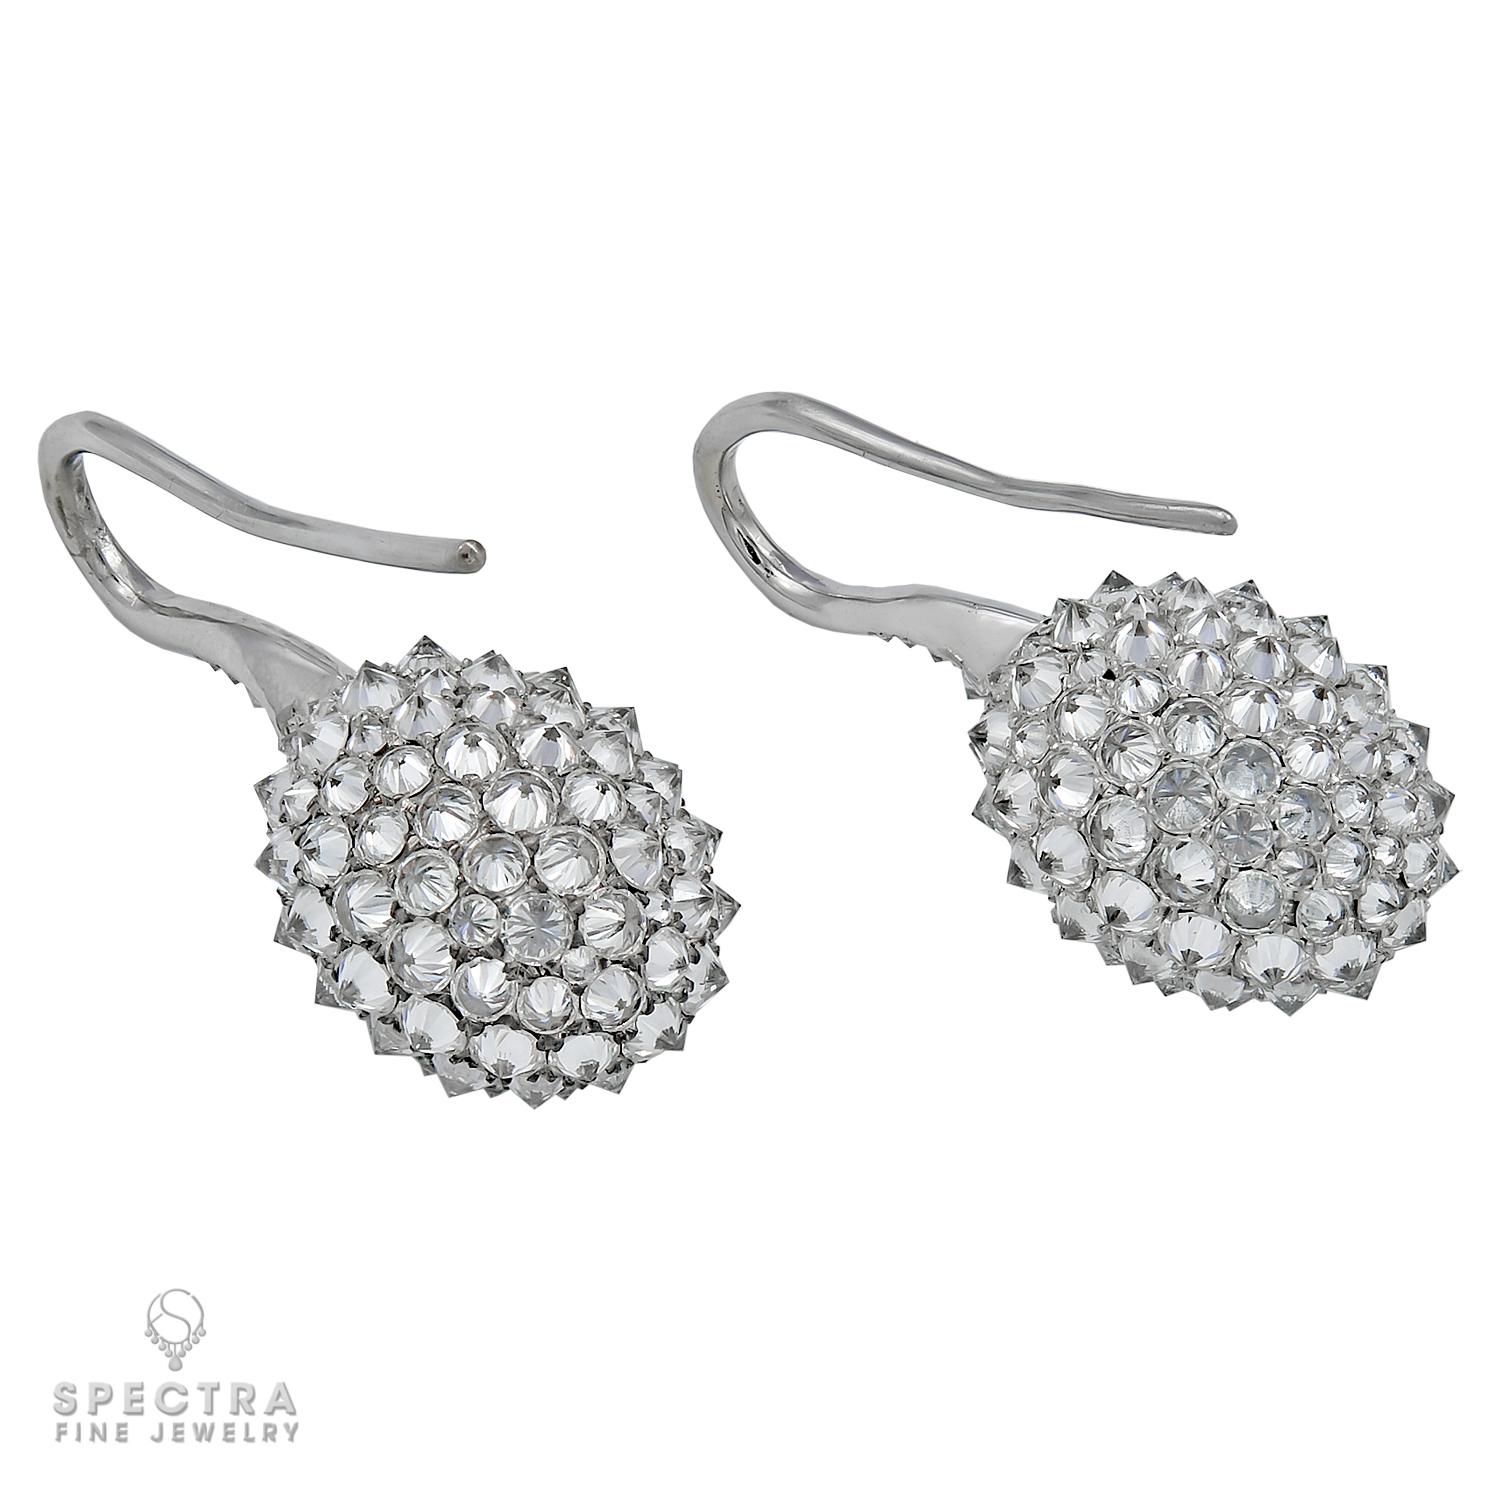 Unique earrings comprising of two oval center diamonds weighing 0.75 carat and 0.78 carat with F-G color, VVS-VS clarity. Not certified. 
The center stones are surrounded by a halo of round diamonds and three circles of inversely-set diamonds.